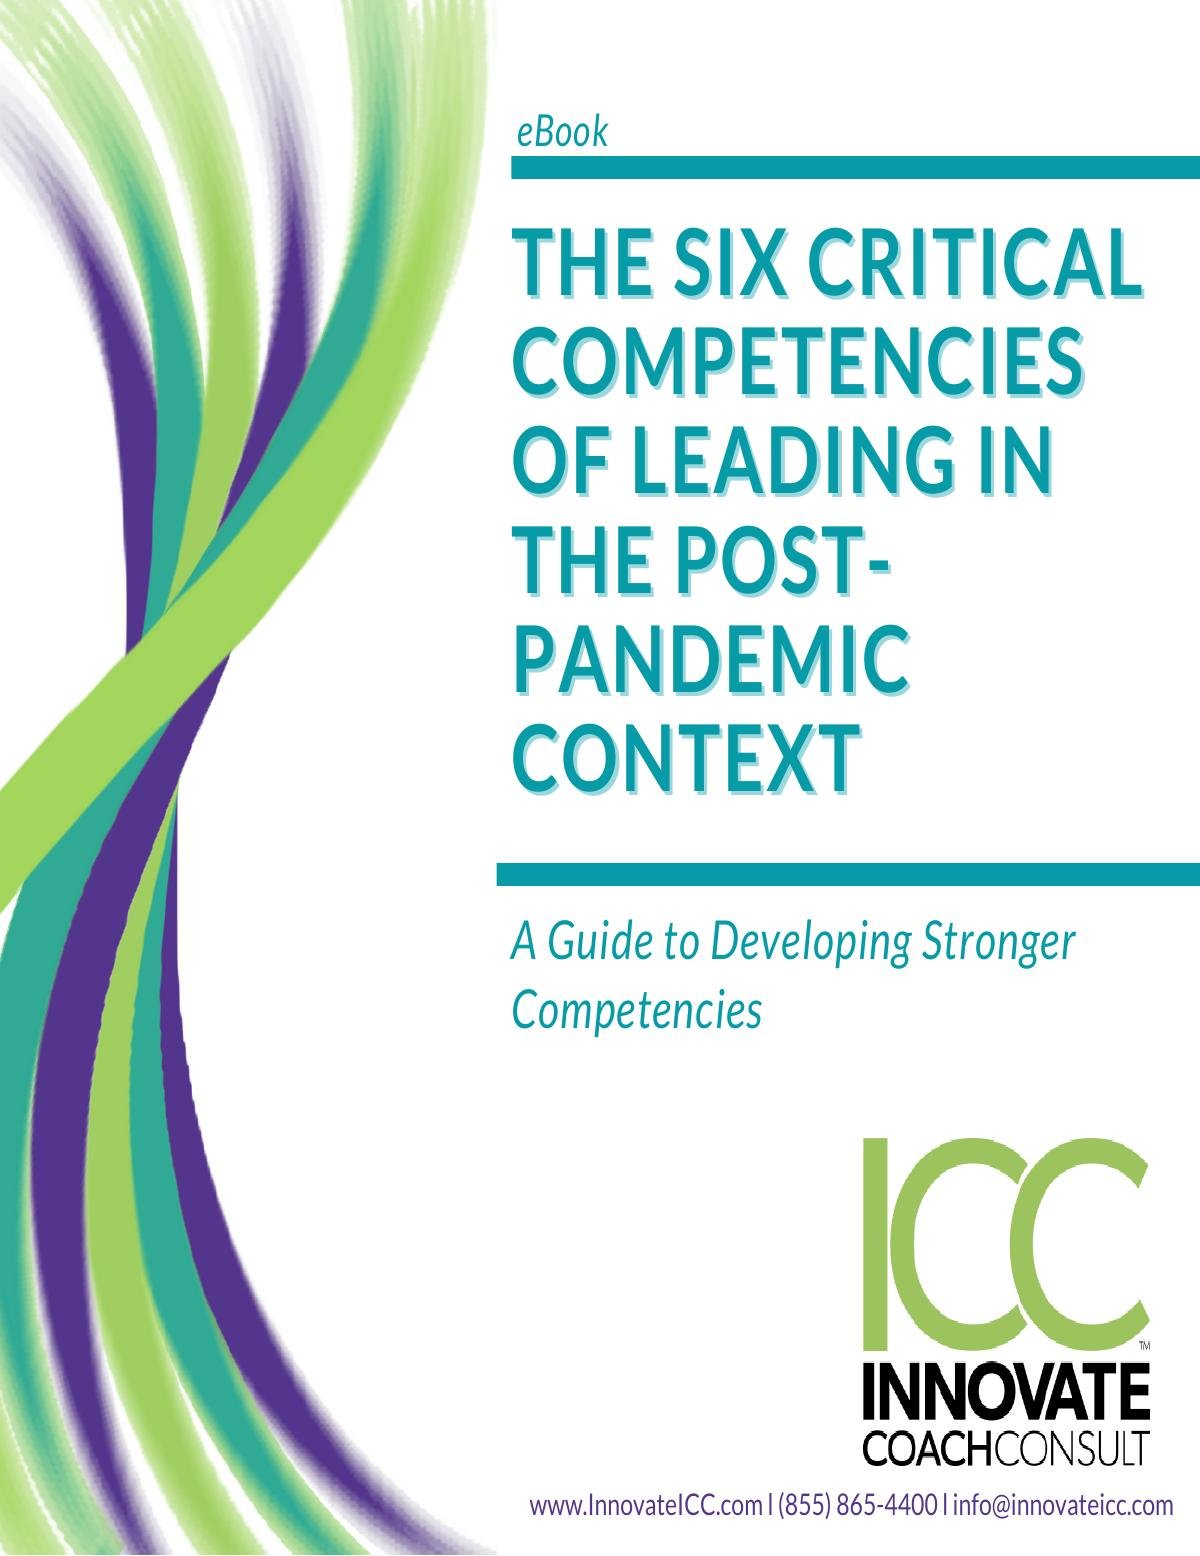 The Six Critical Competencies of Leading in the Post-Pandemic Context